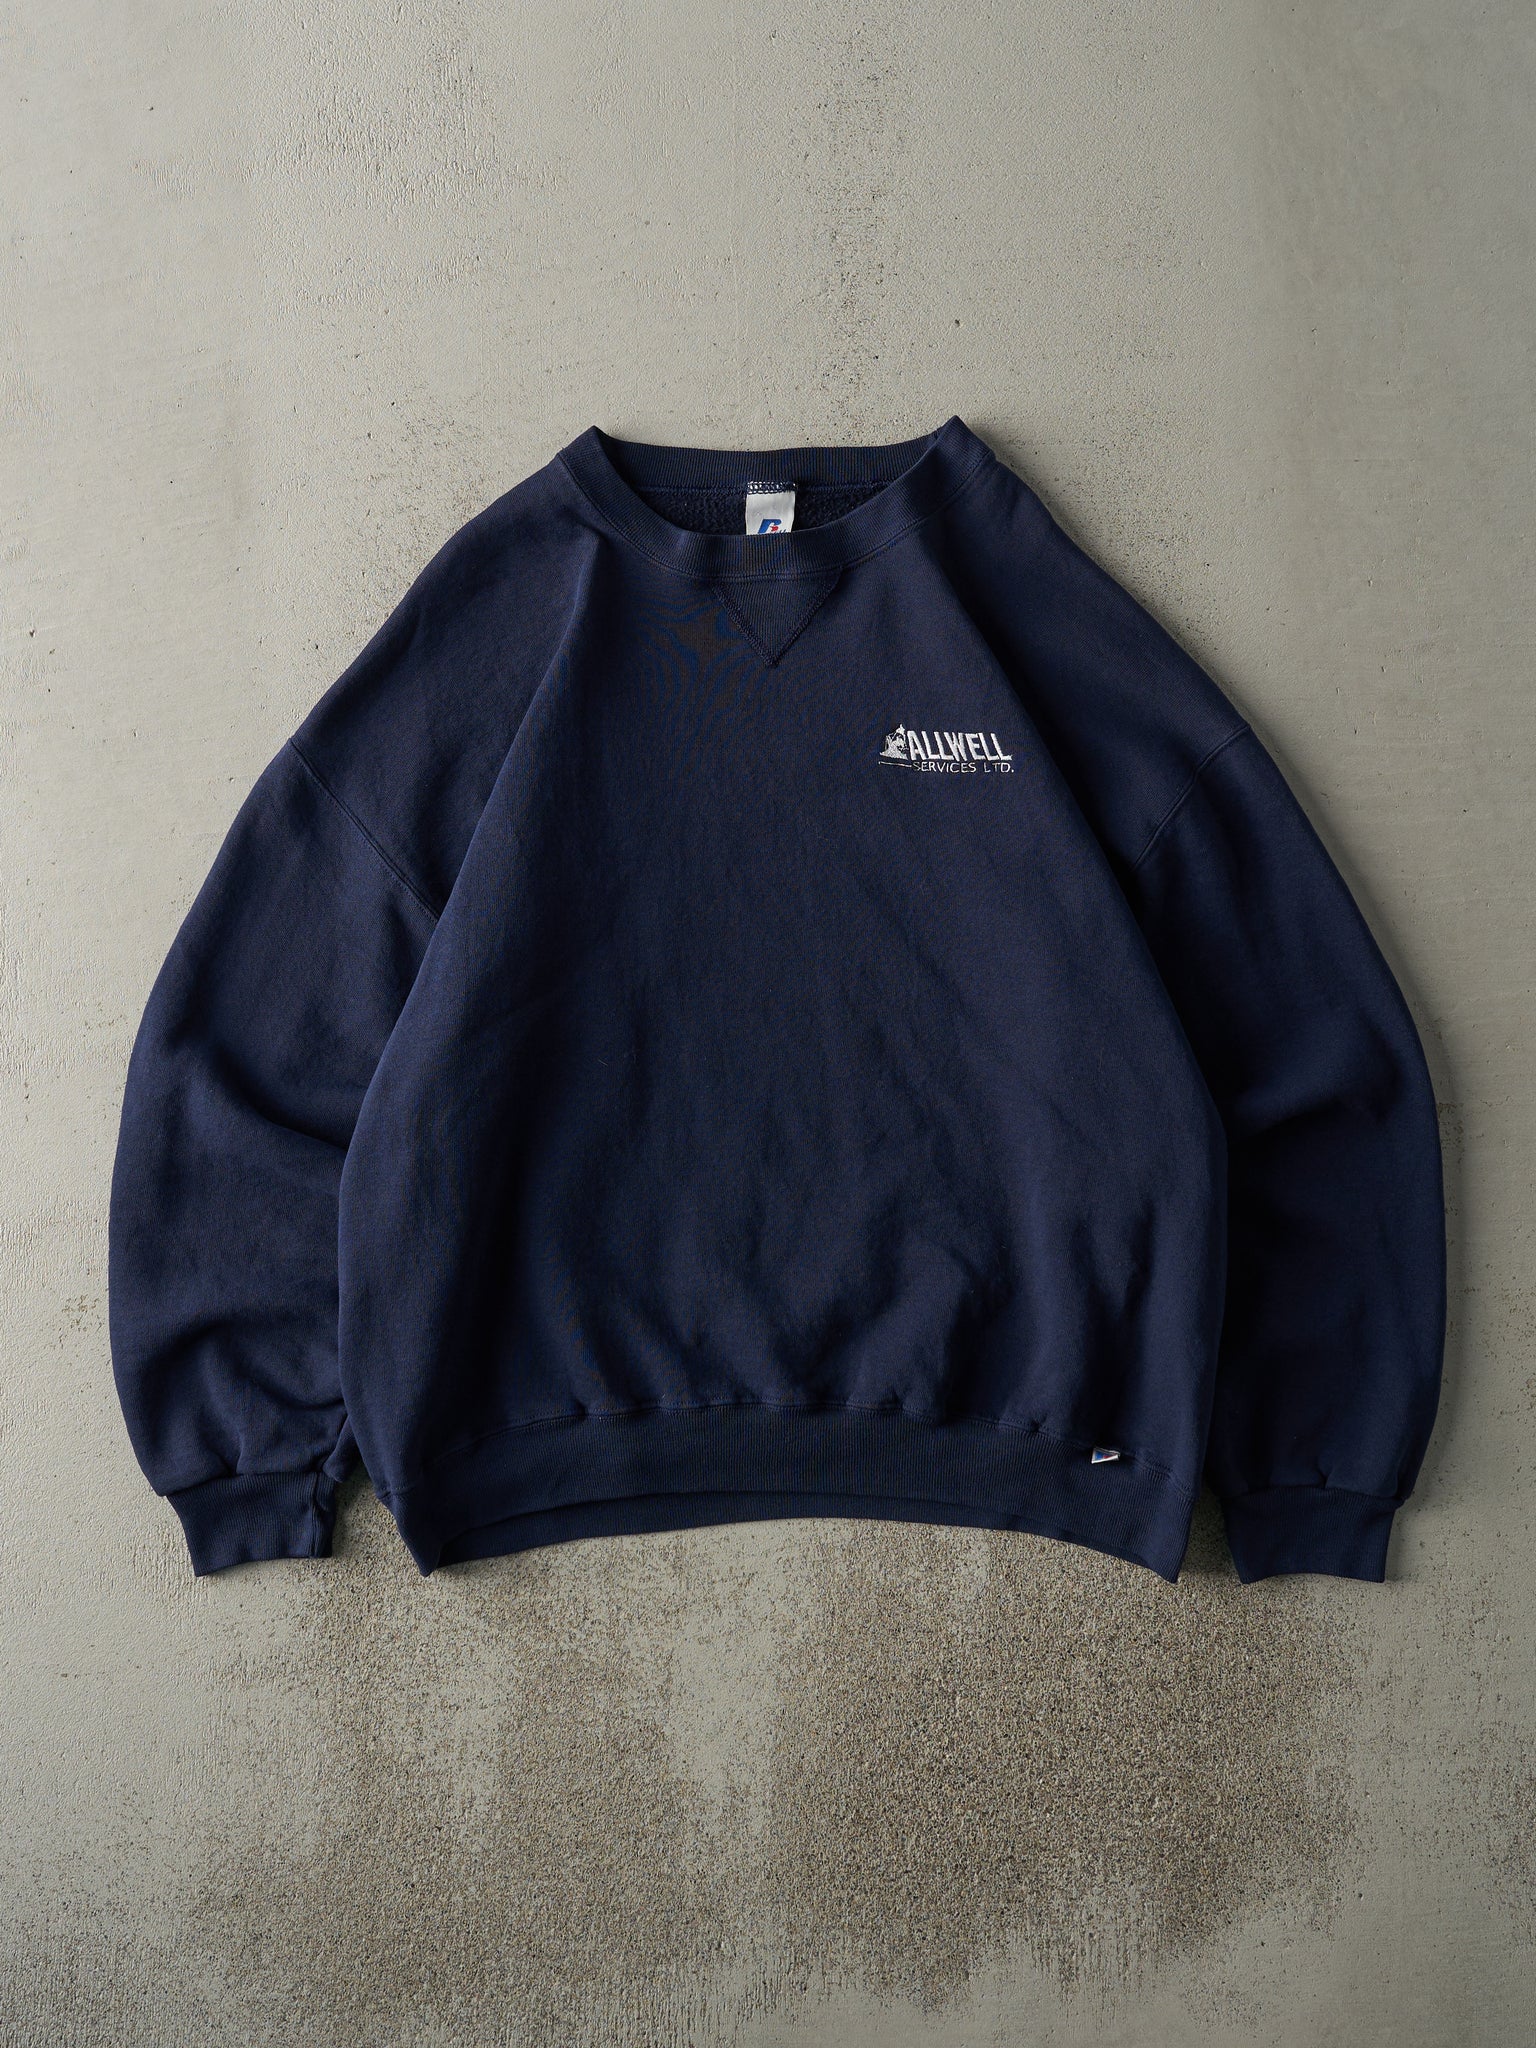 Vintage 90s Navy Blue Embroidered Logo Russell Athletic Crewneck (L)